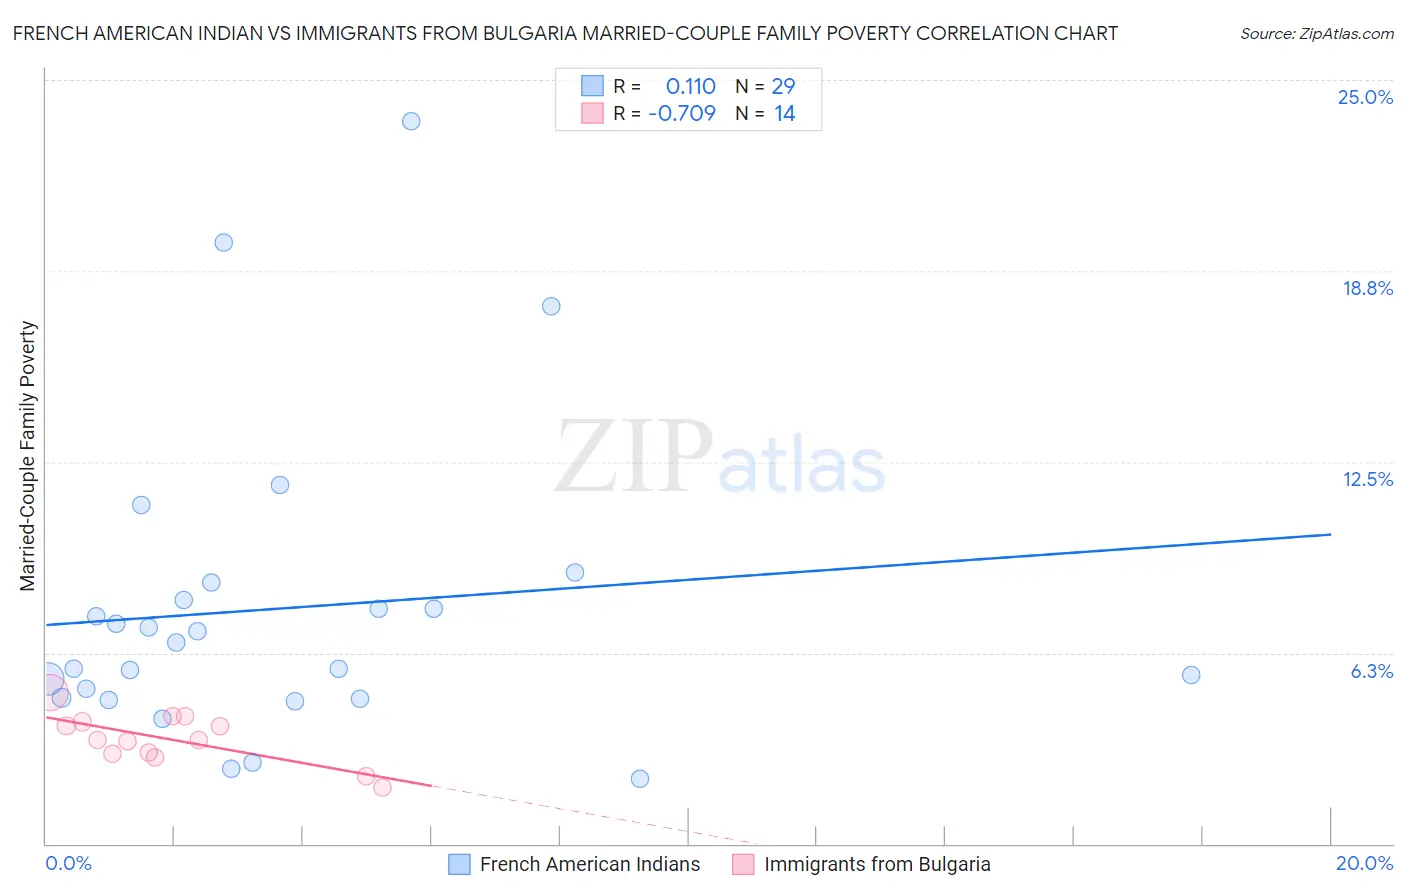 French American Indian vs Immigrants from Bulgaria Married-Couple Family Poverty